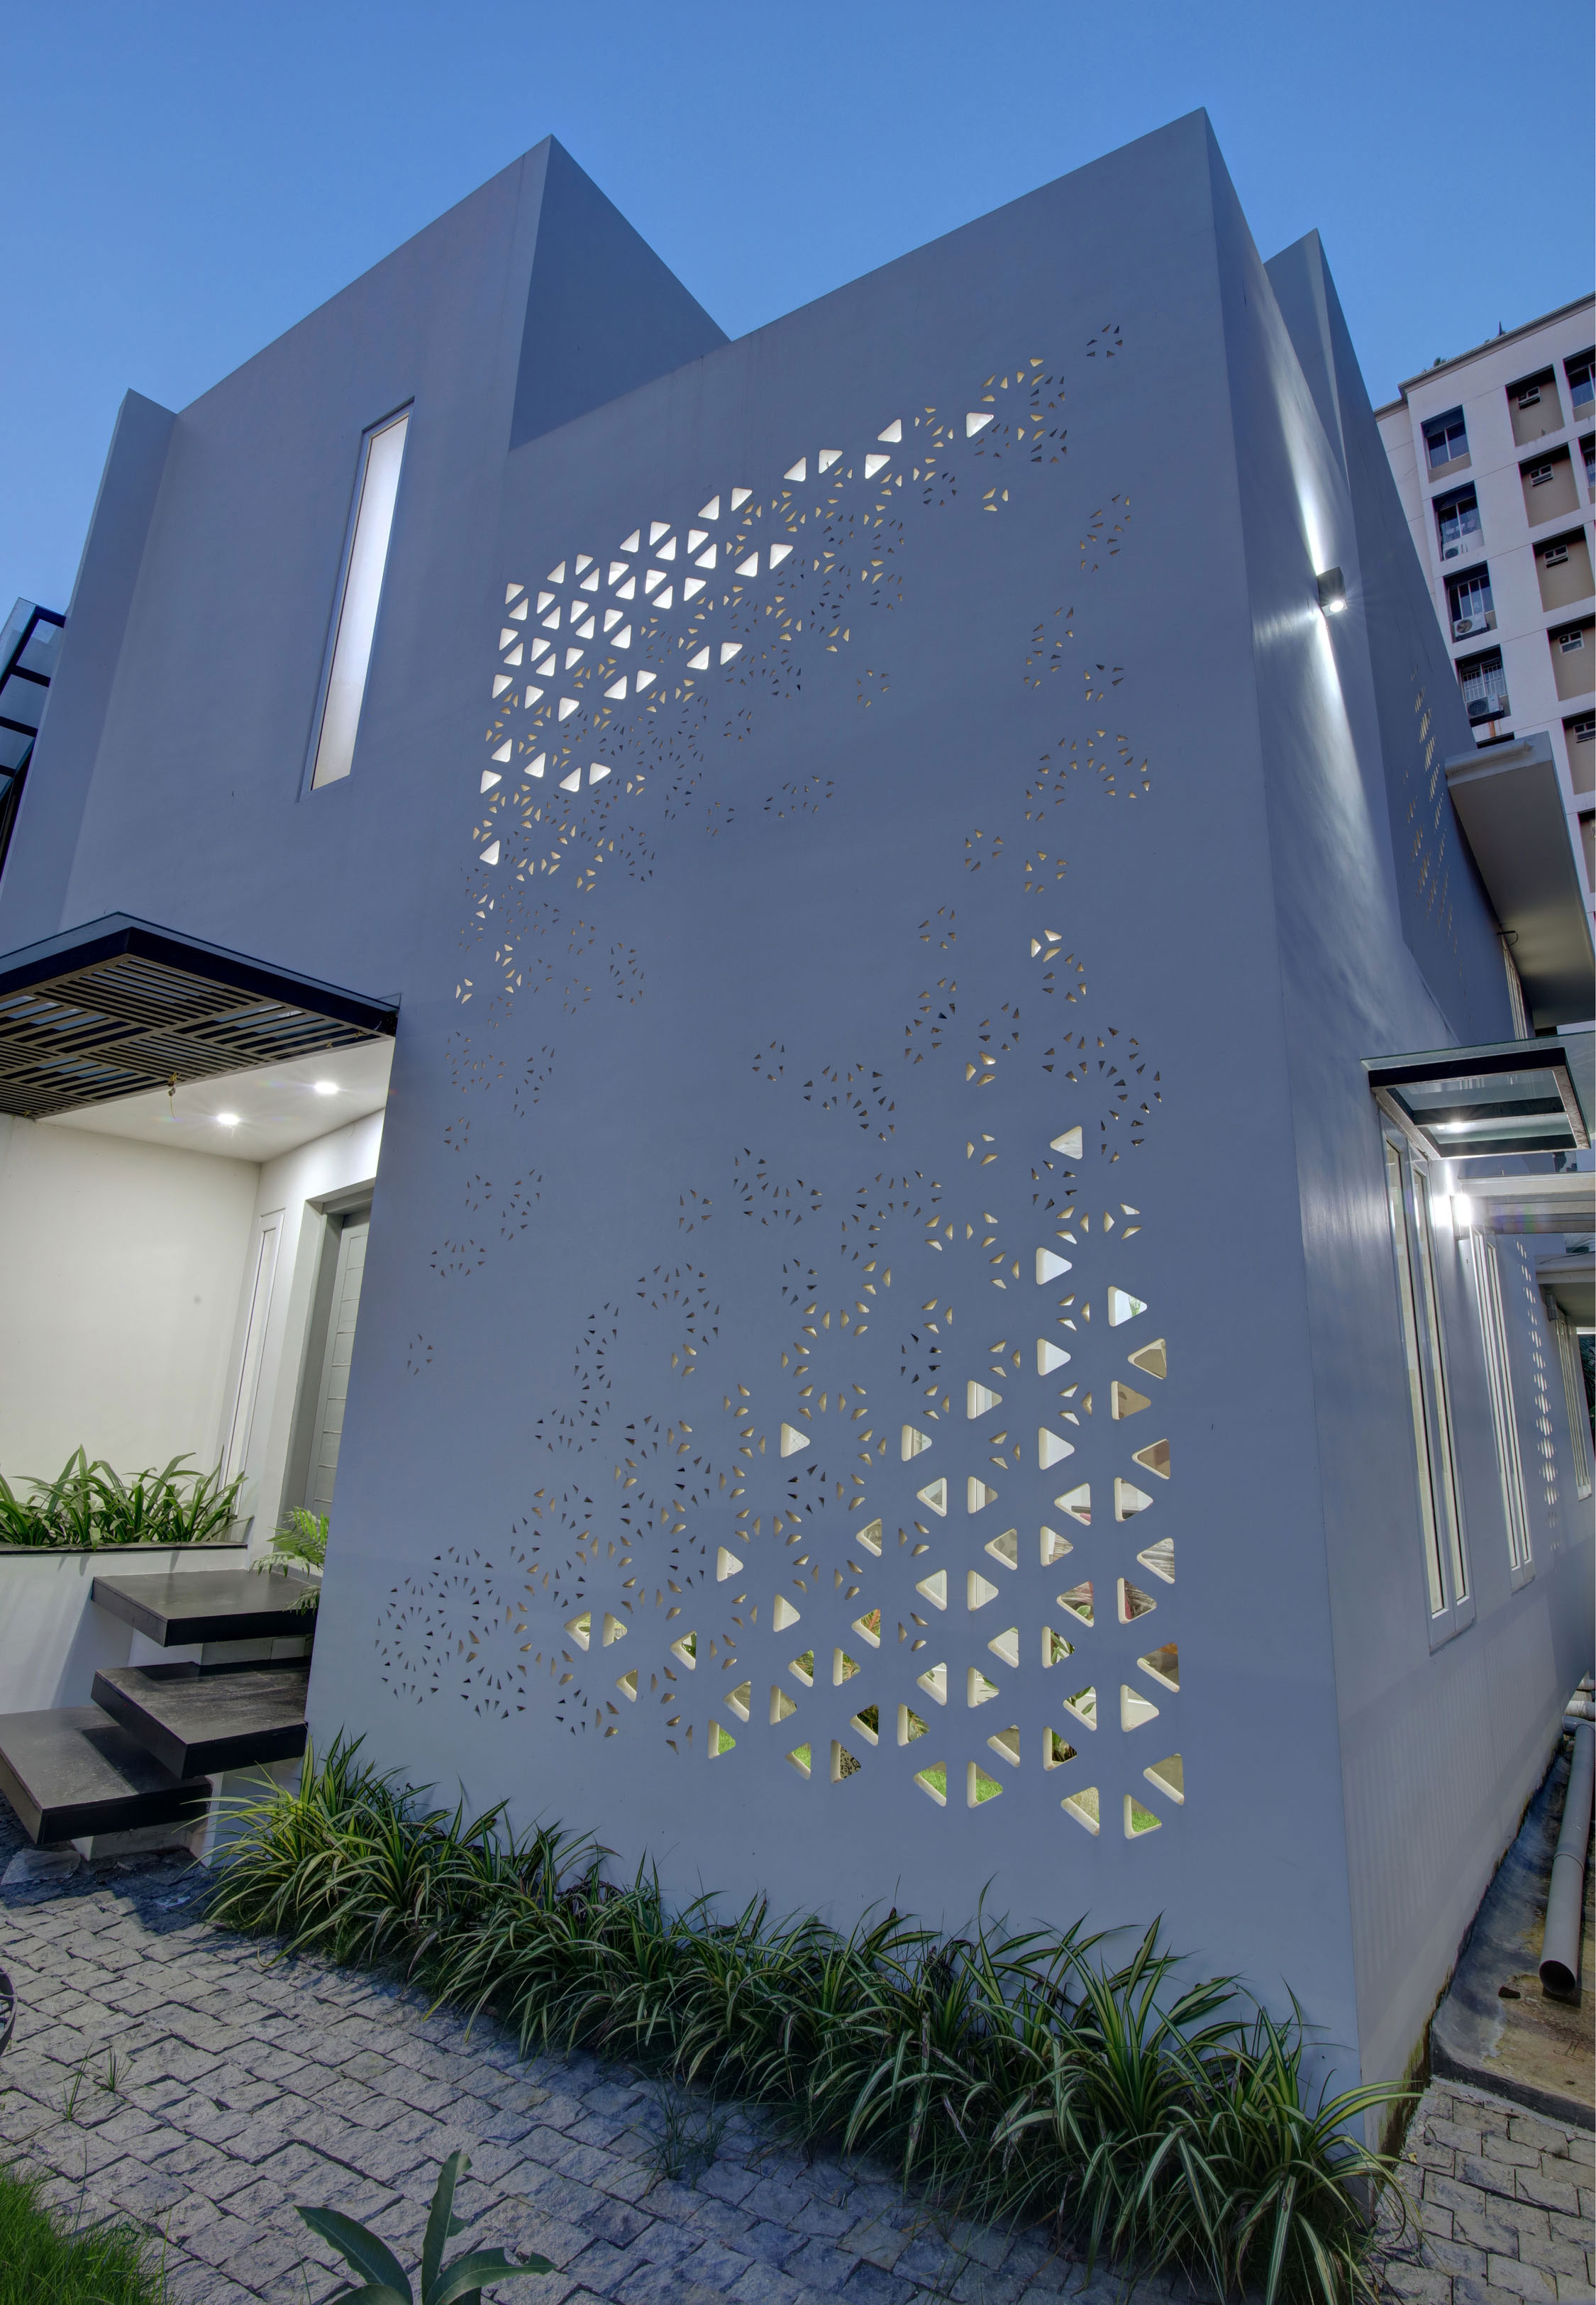 The custom designed screen wall with perforations.